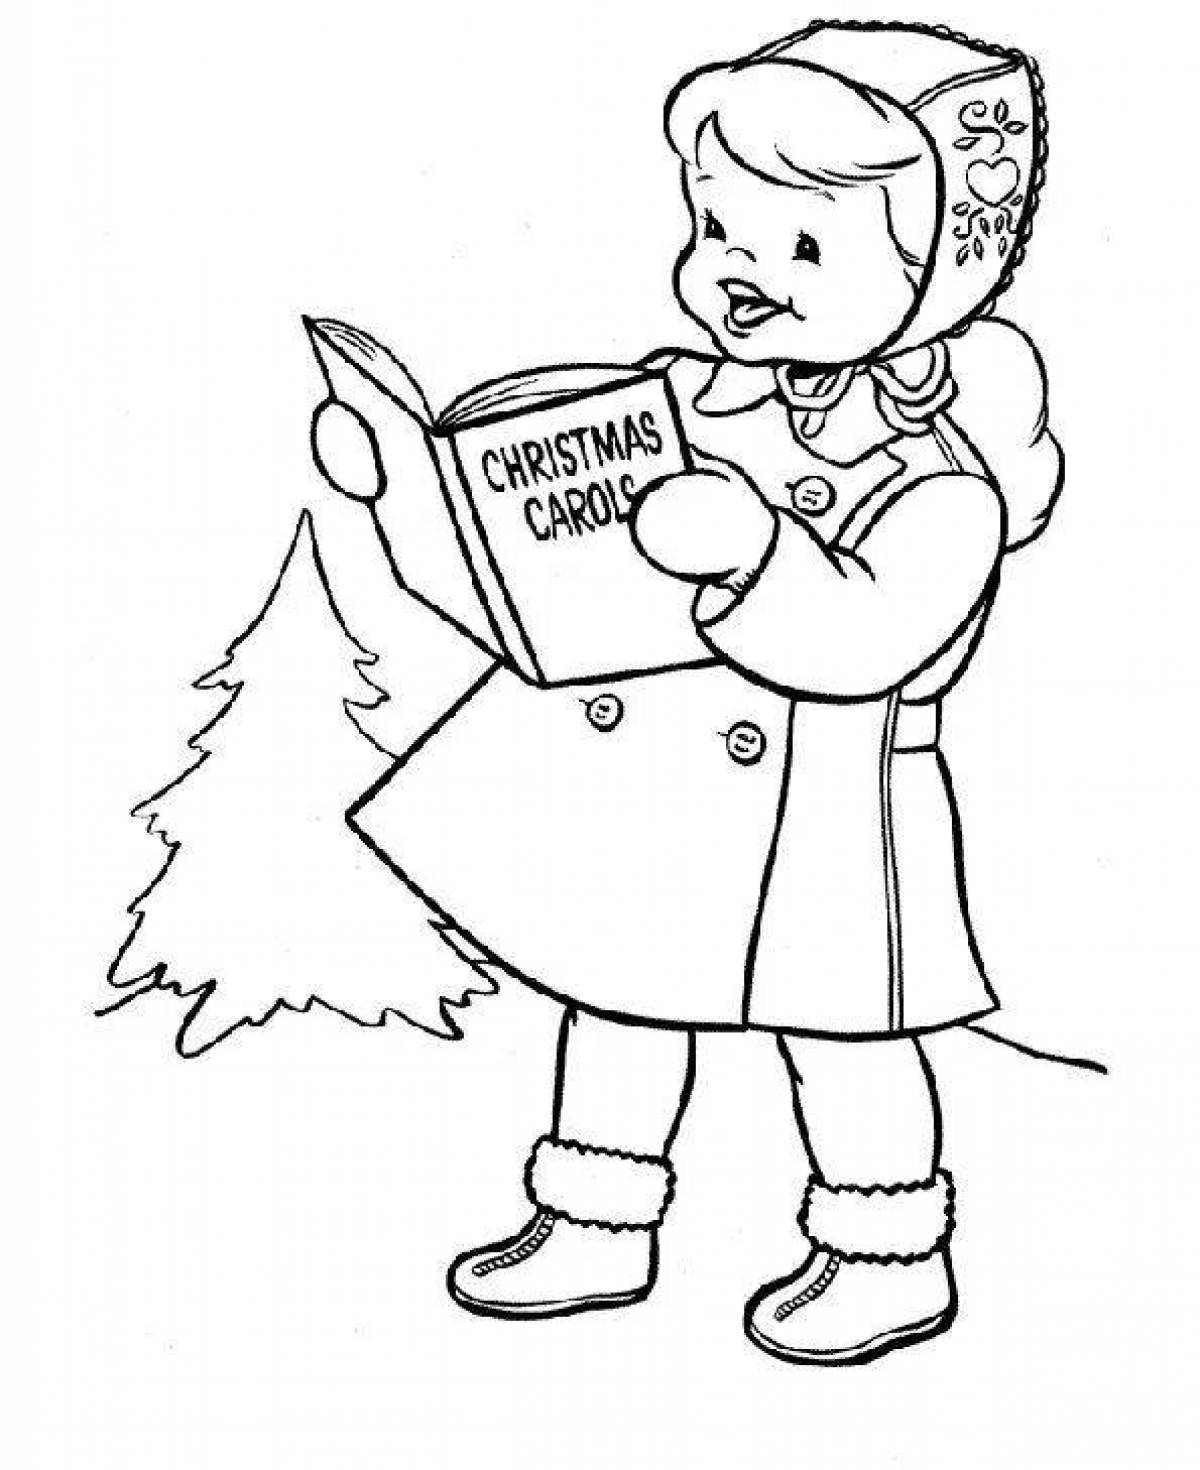 Cheerful carol coloring pages for preschoolers